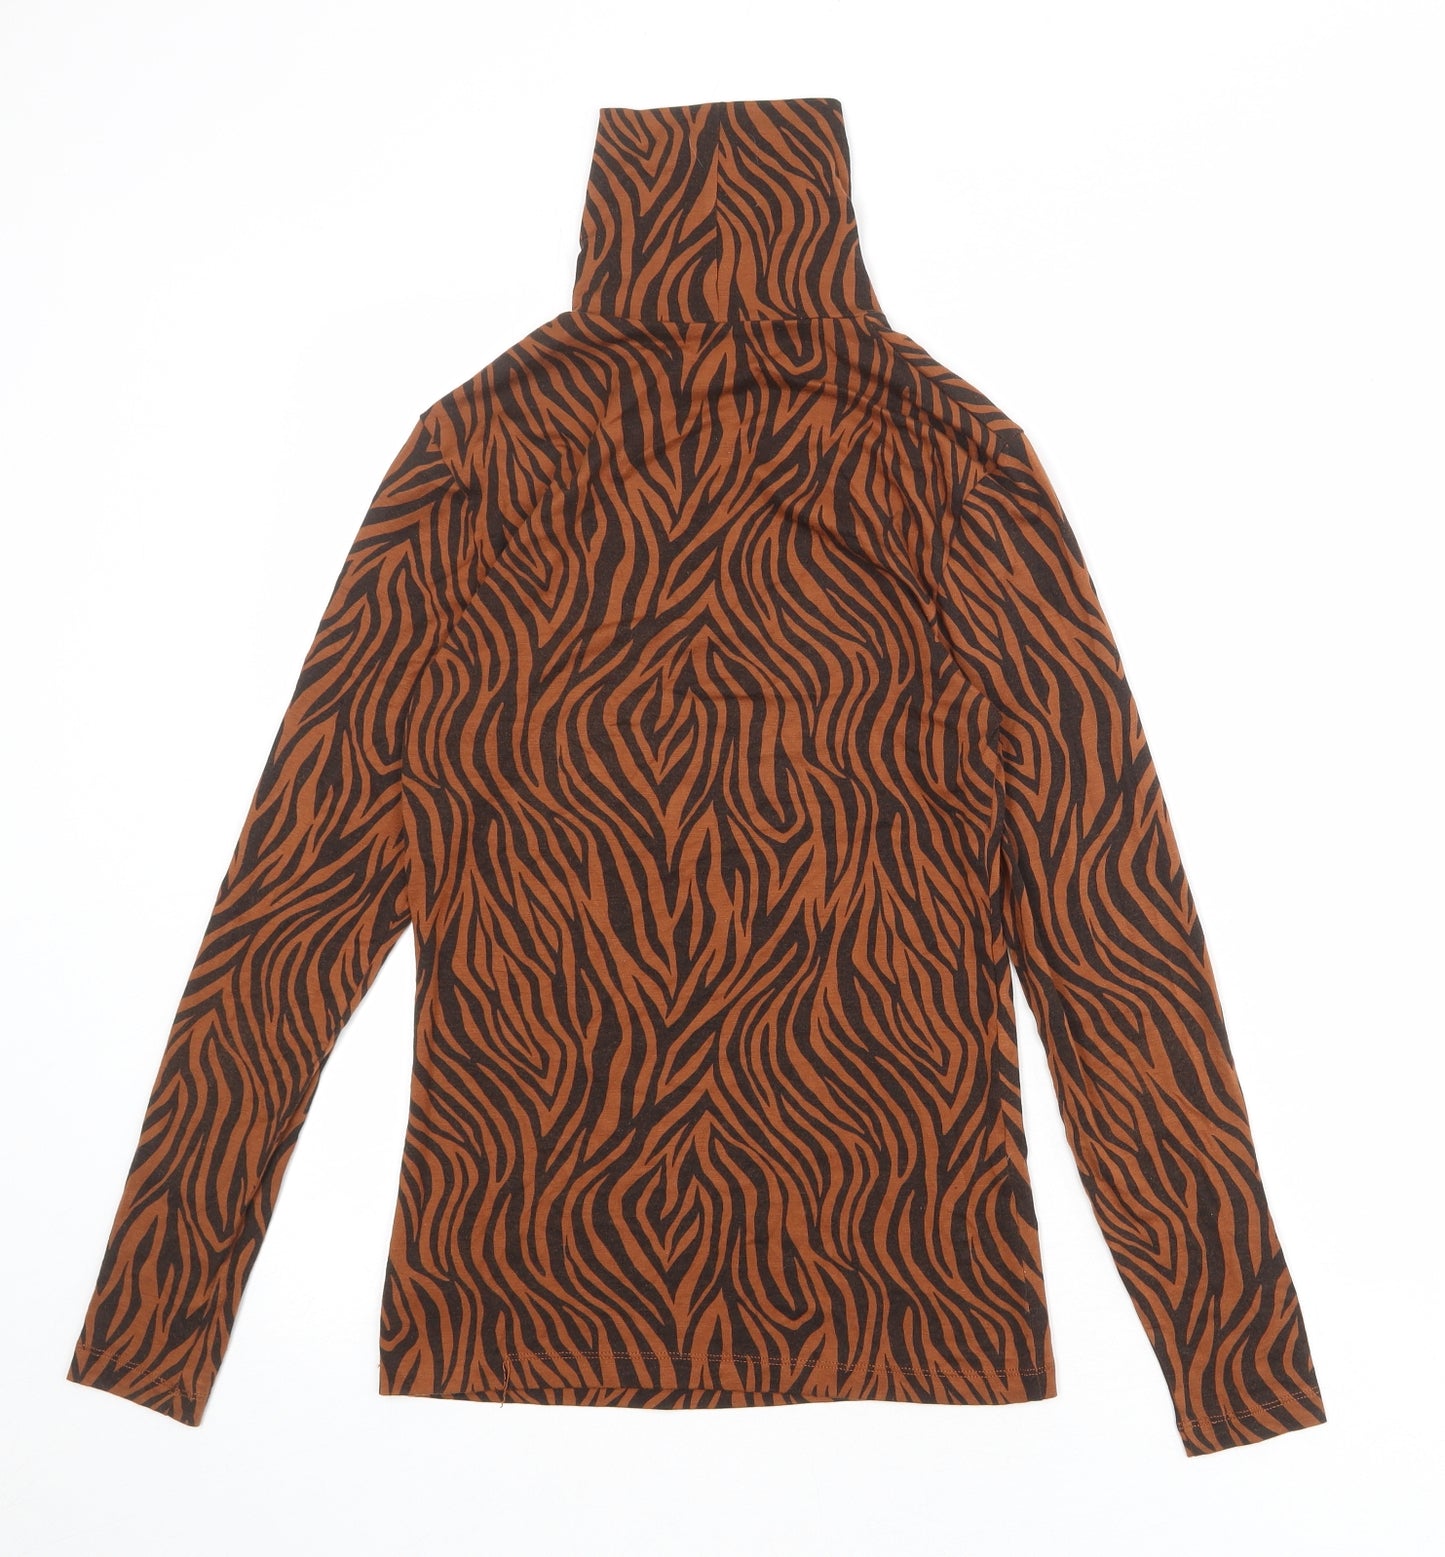 Marks and Spencer Womens Brown Animal Print Acrylic Basic T-Shirt Size 12 Roll Neck - Tiger Print